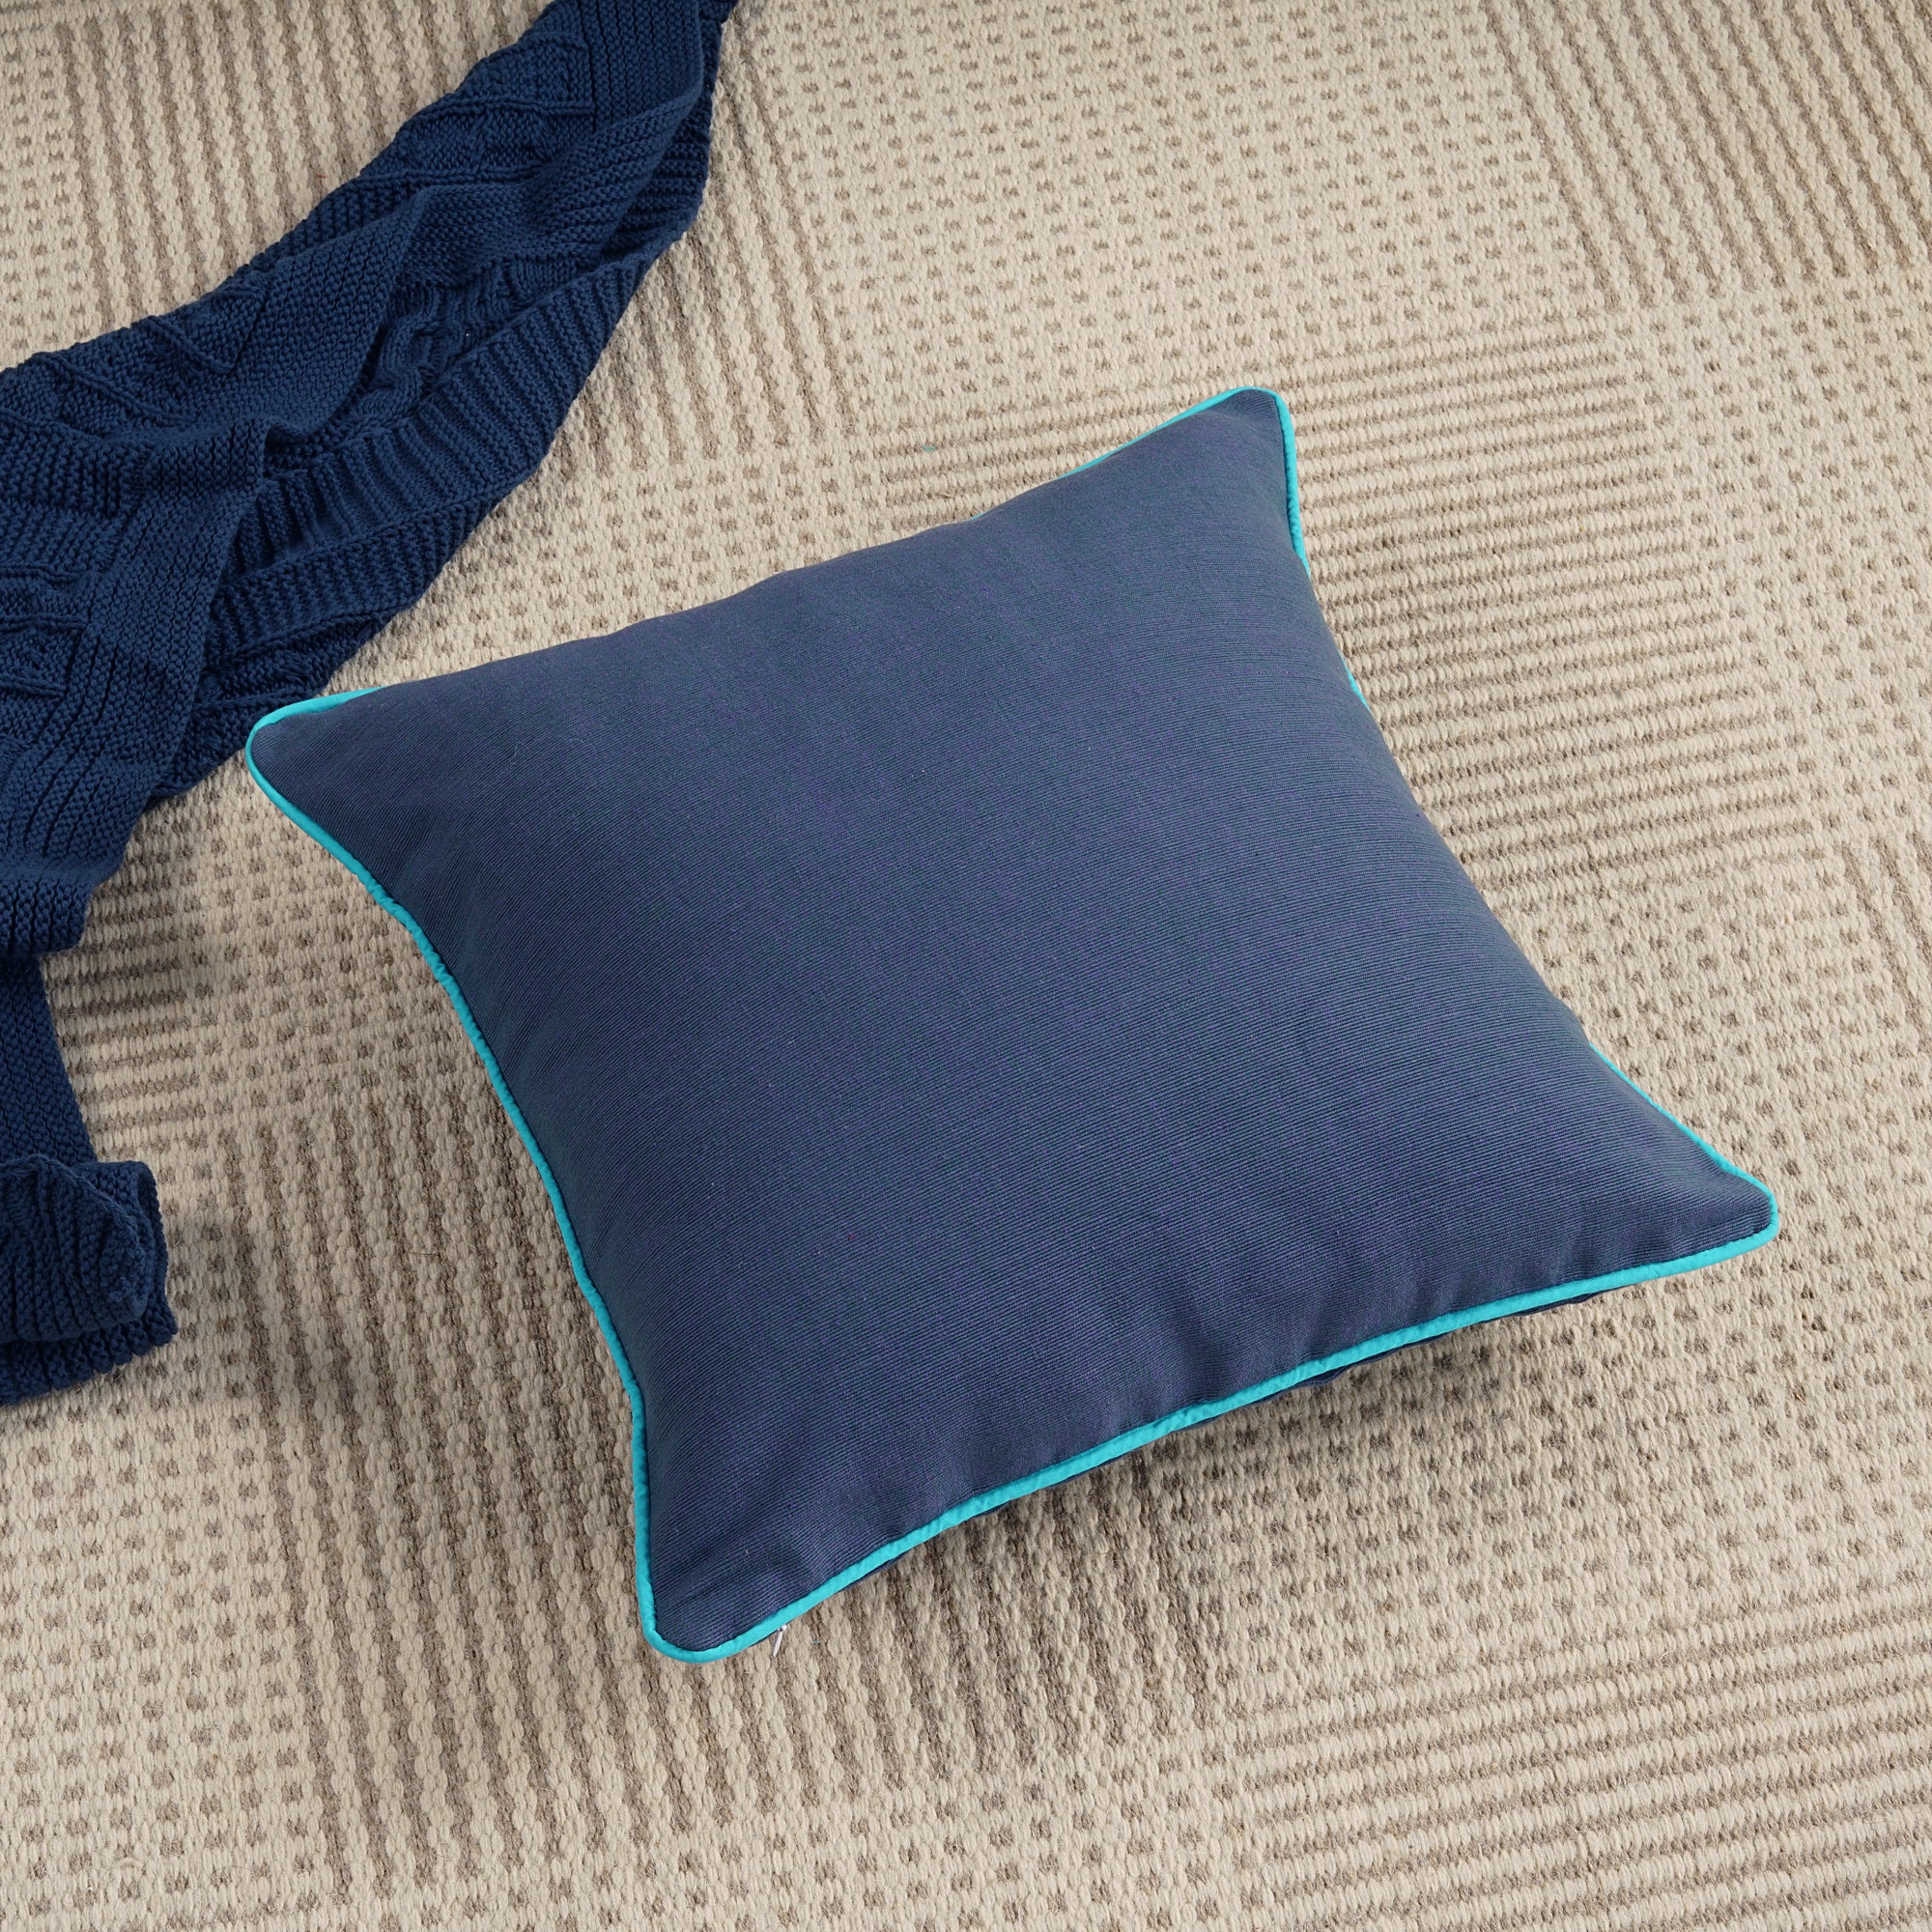 Soft Woven Corded Stripe Cotton Cushion Cover Set in Blue online (1Pc)